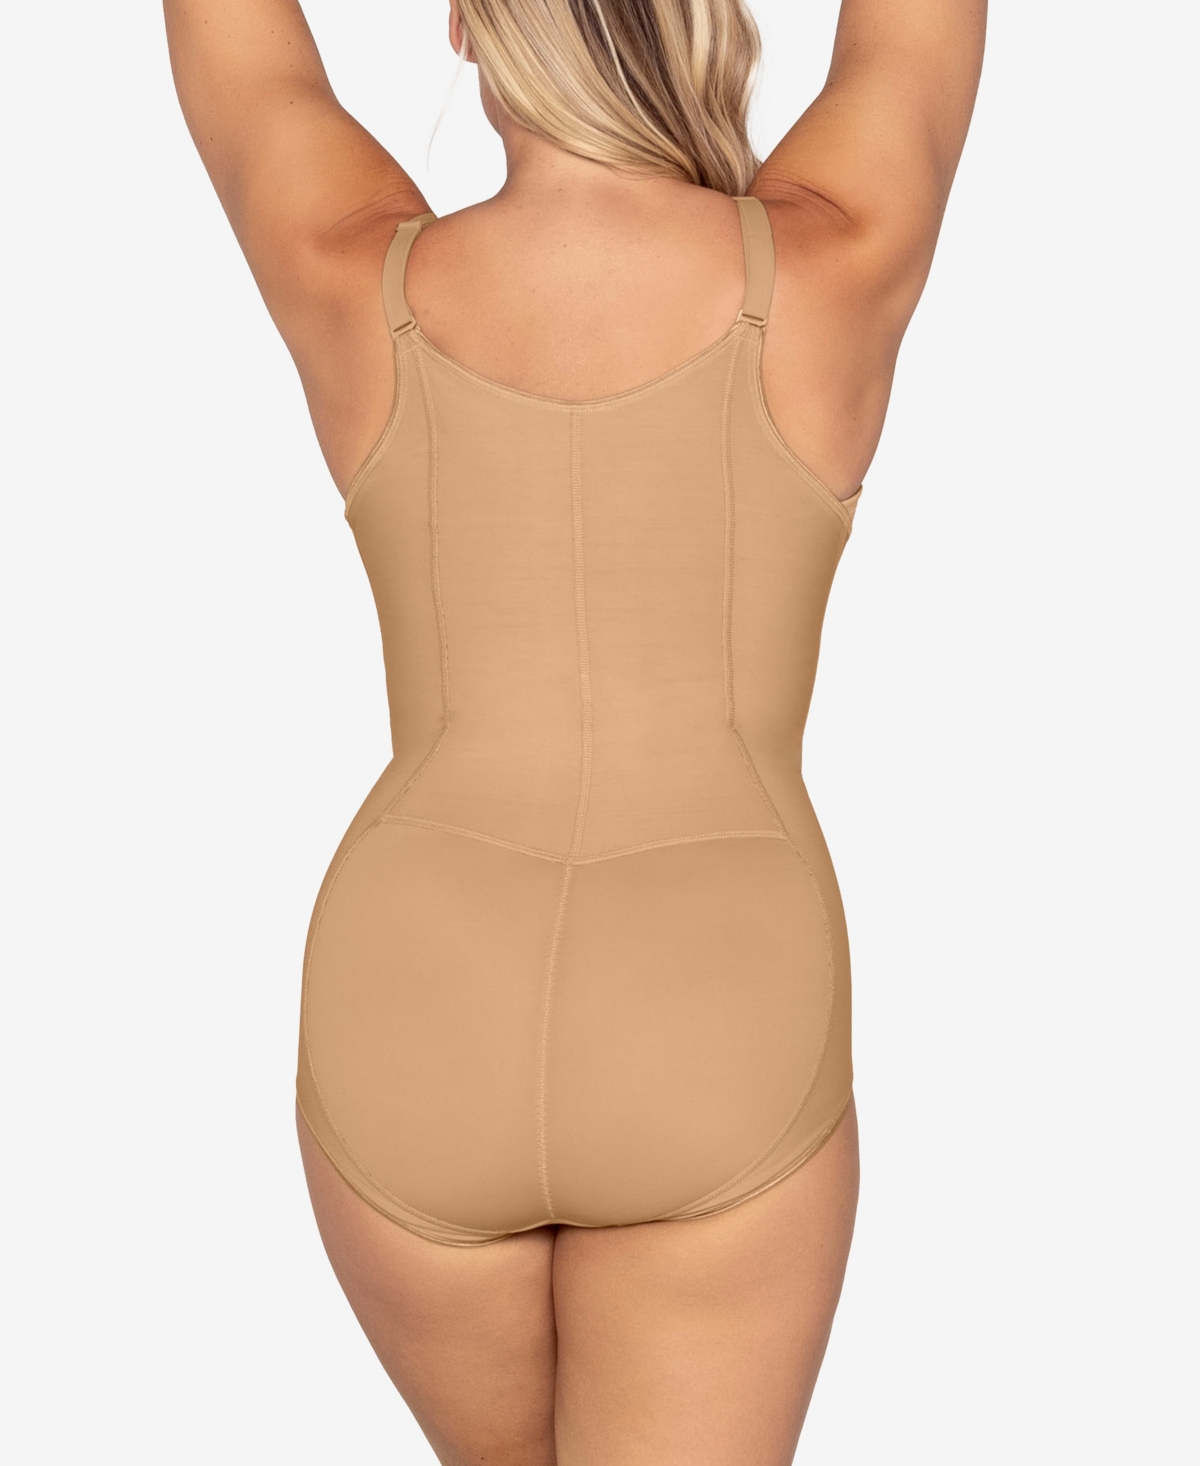 Strapless Low Back Slimming Bodysuit Faja. Smoothing Firm Control